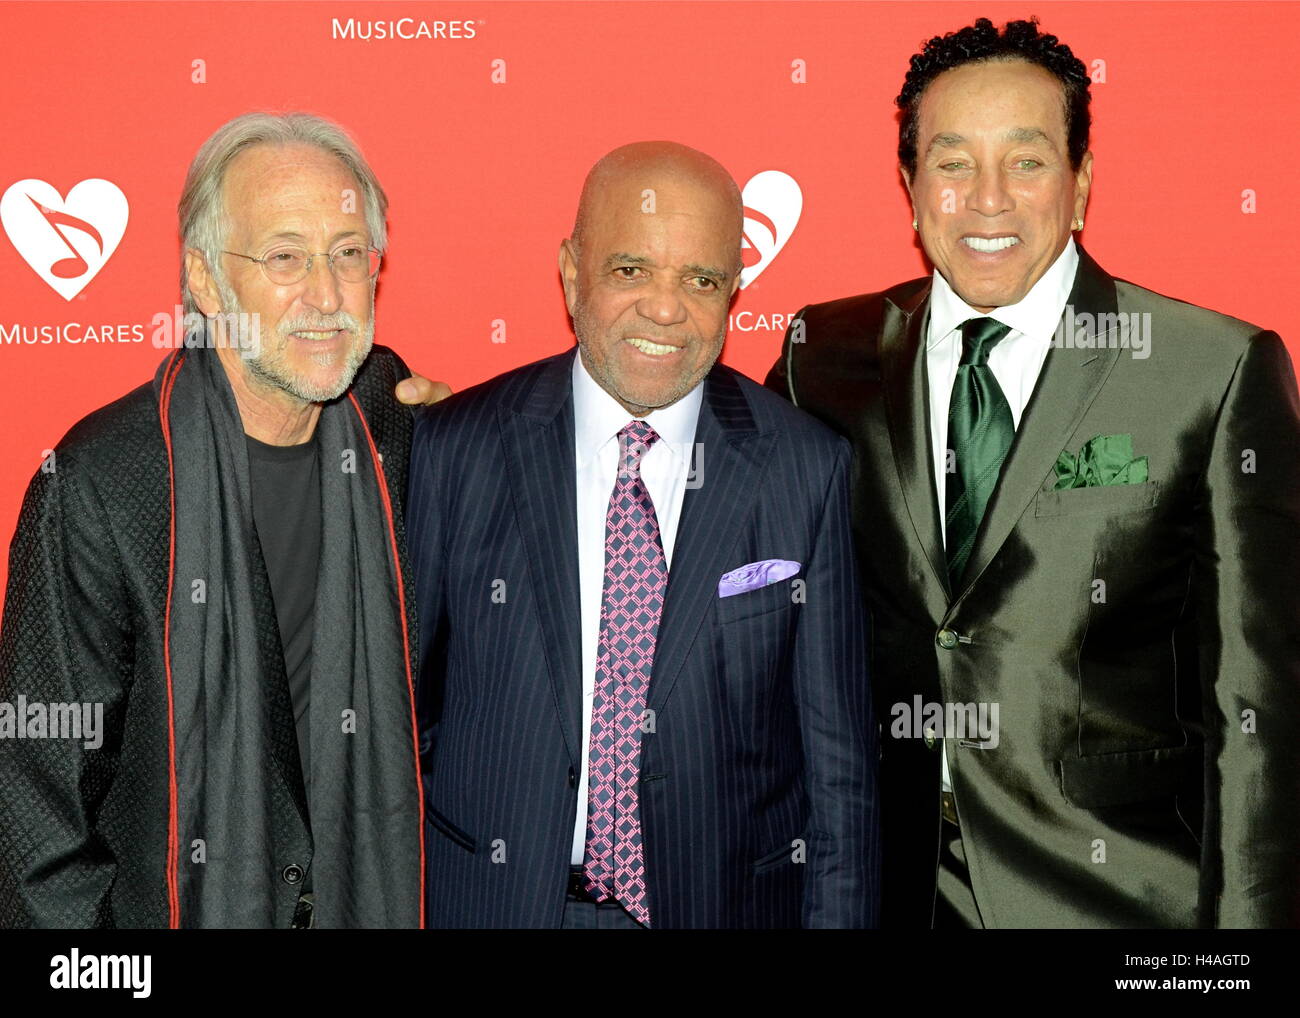 Neil Portnow, Barry Gordy andSmokey Robinson arrives for the 12th Annual MusiCares MAP Fund Tribute Concert at The Novo by Microsoft on May 19, 2016 in Los Angeles, California. Stock Photo